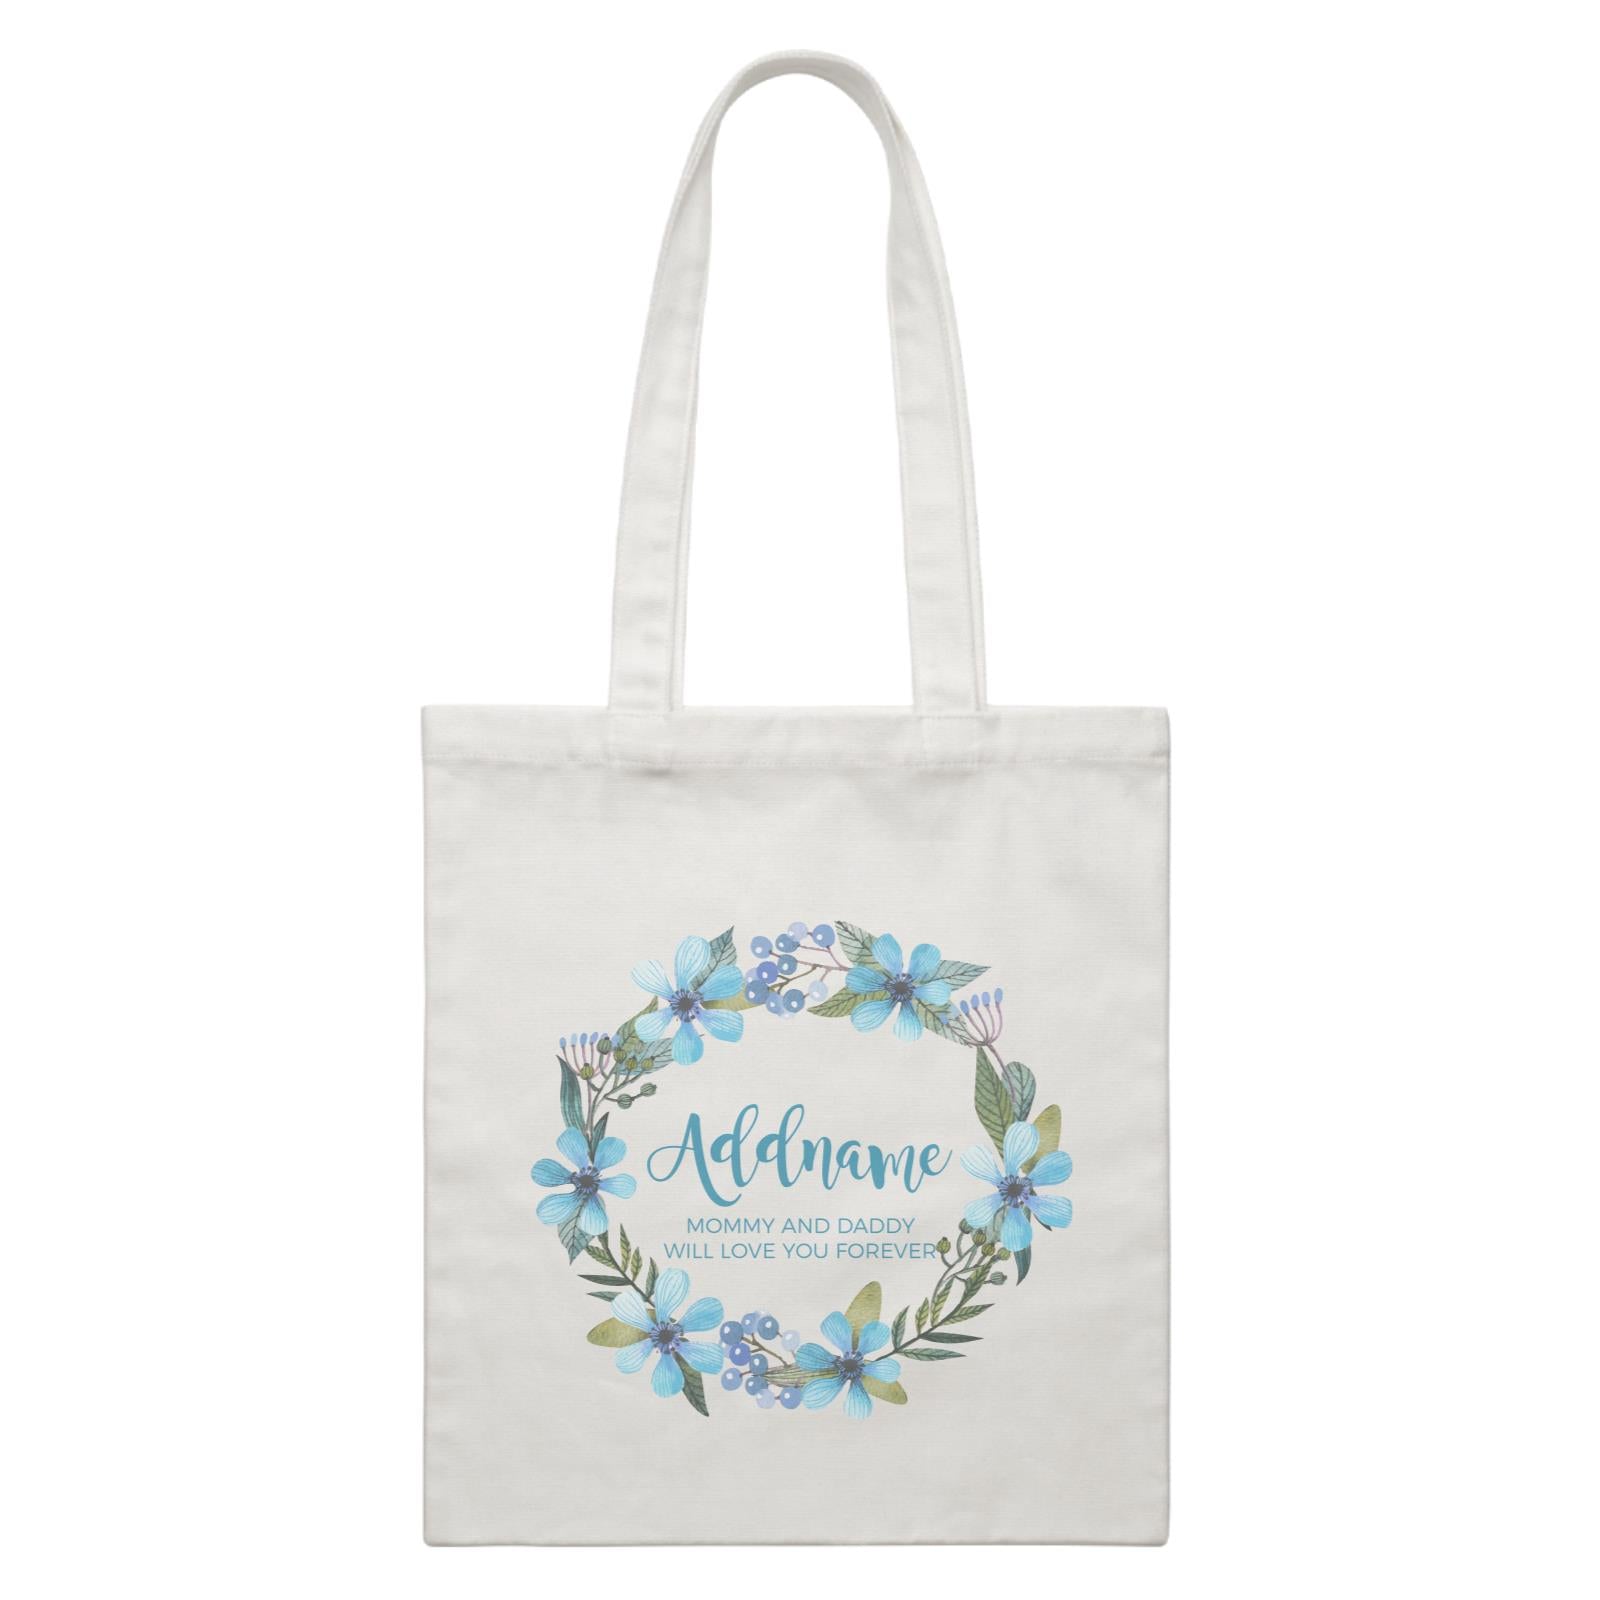 Turqoise Flower Wreath Personalizable with Name and Text White Canvas Bag